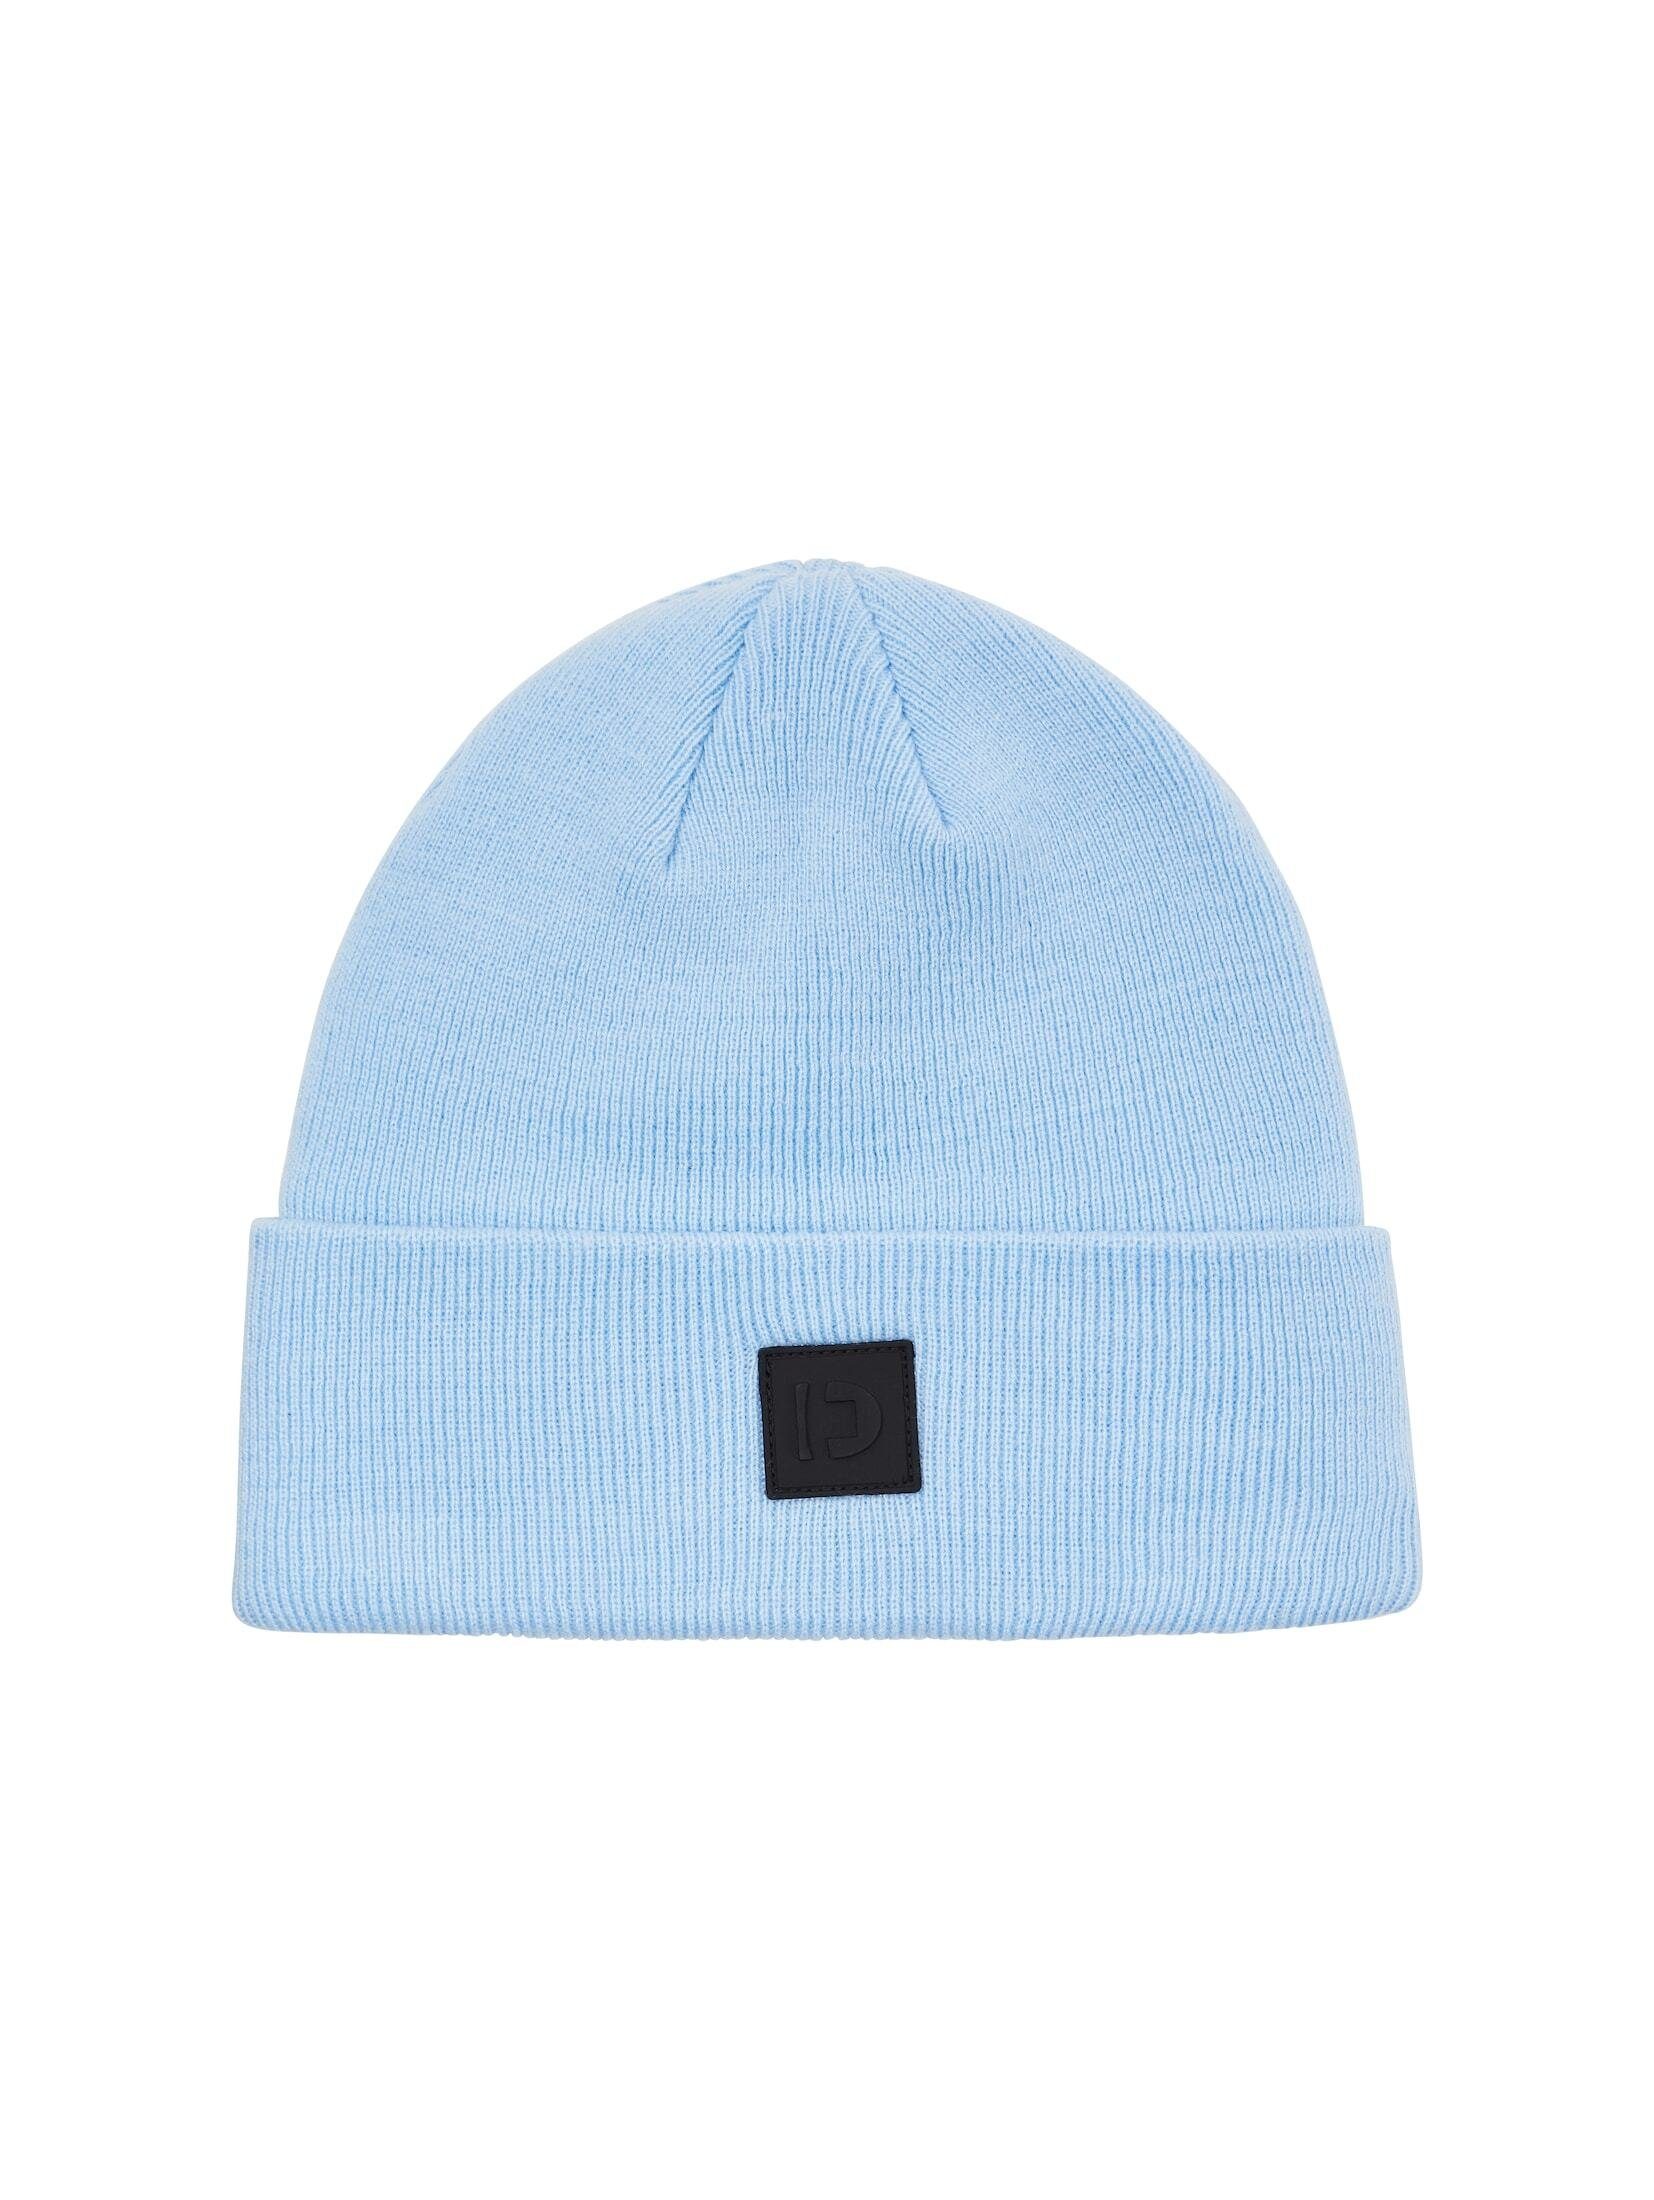 TOM TAILOR Denim Beanie Basic Beanie mit recyceltem Polyacrylic washed out middle blue